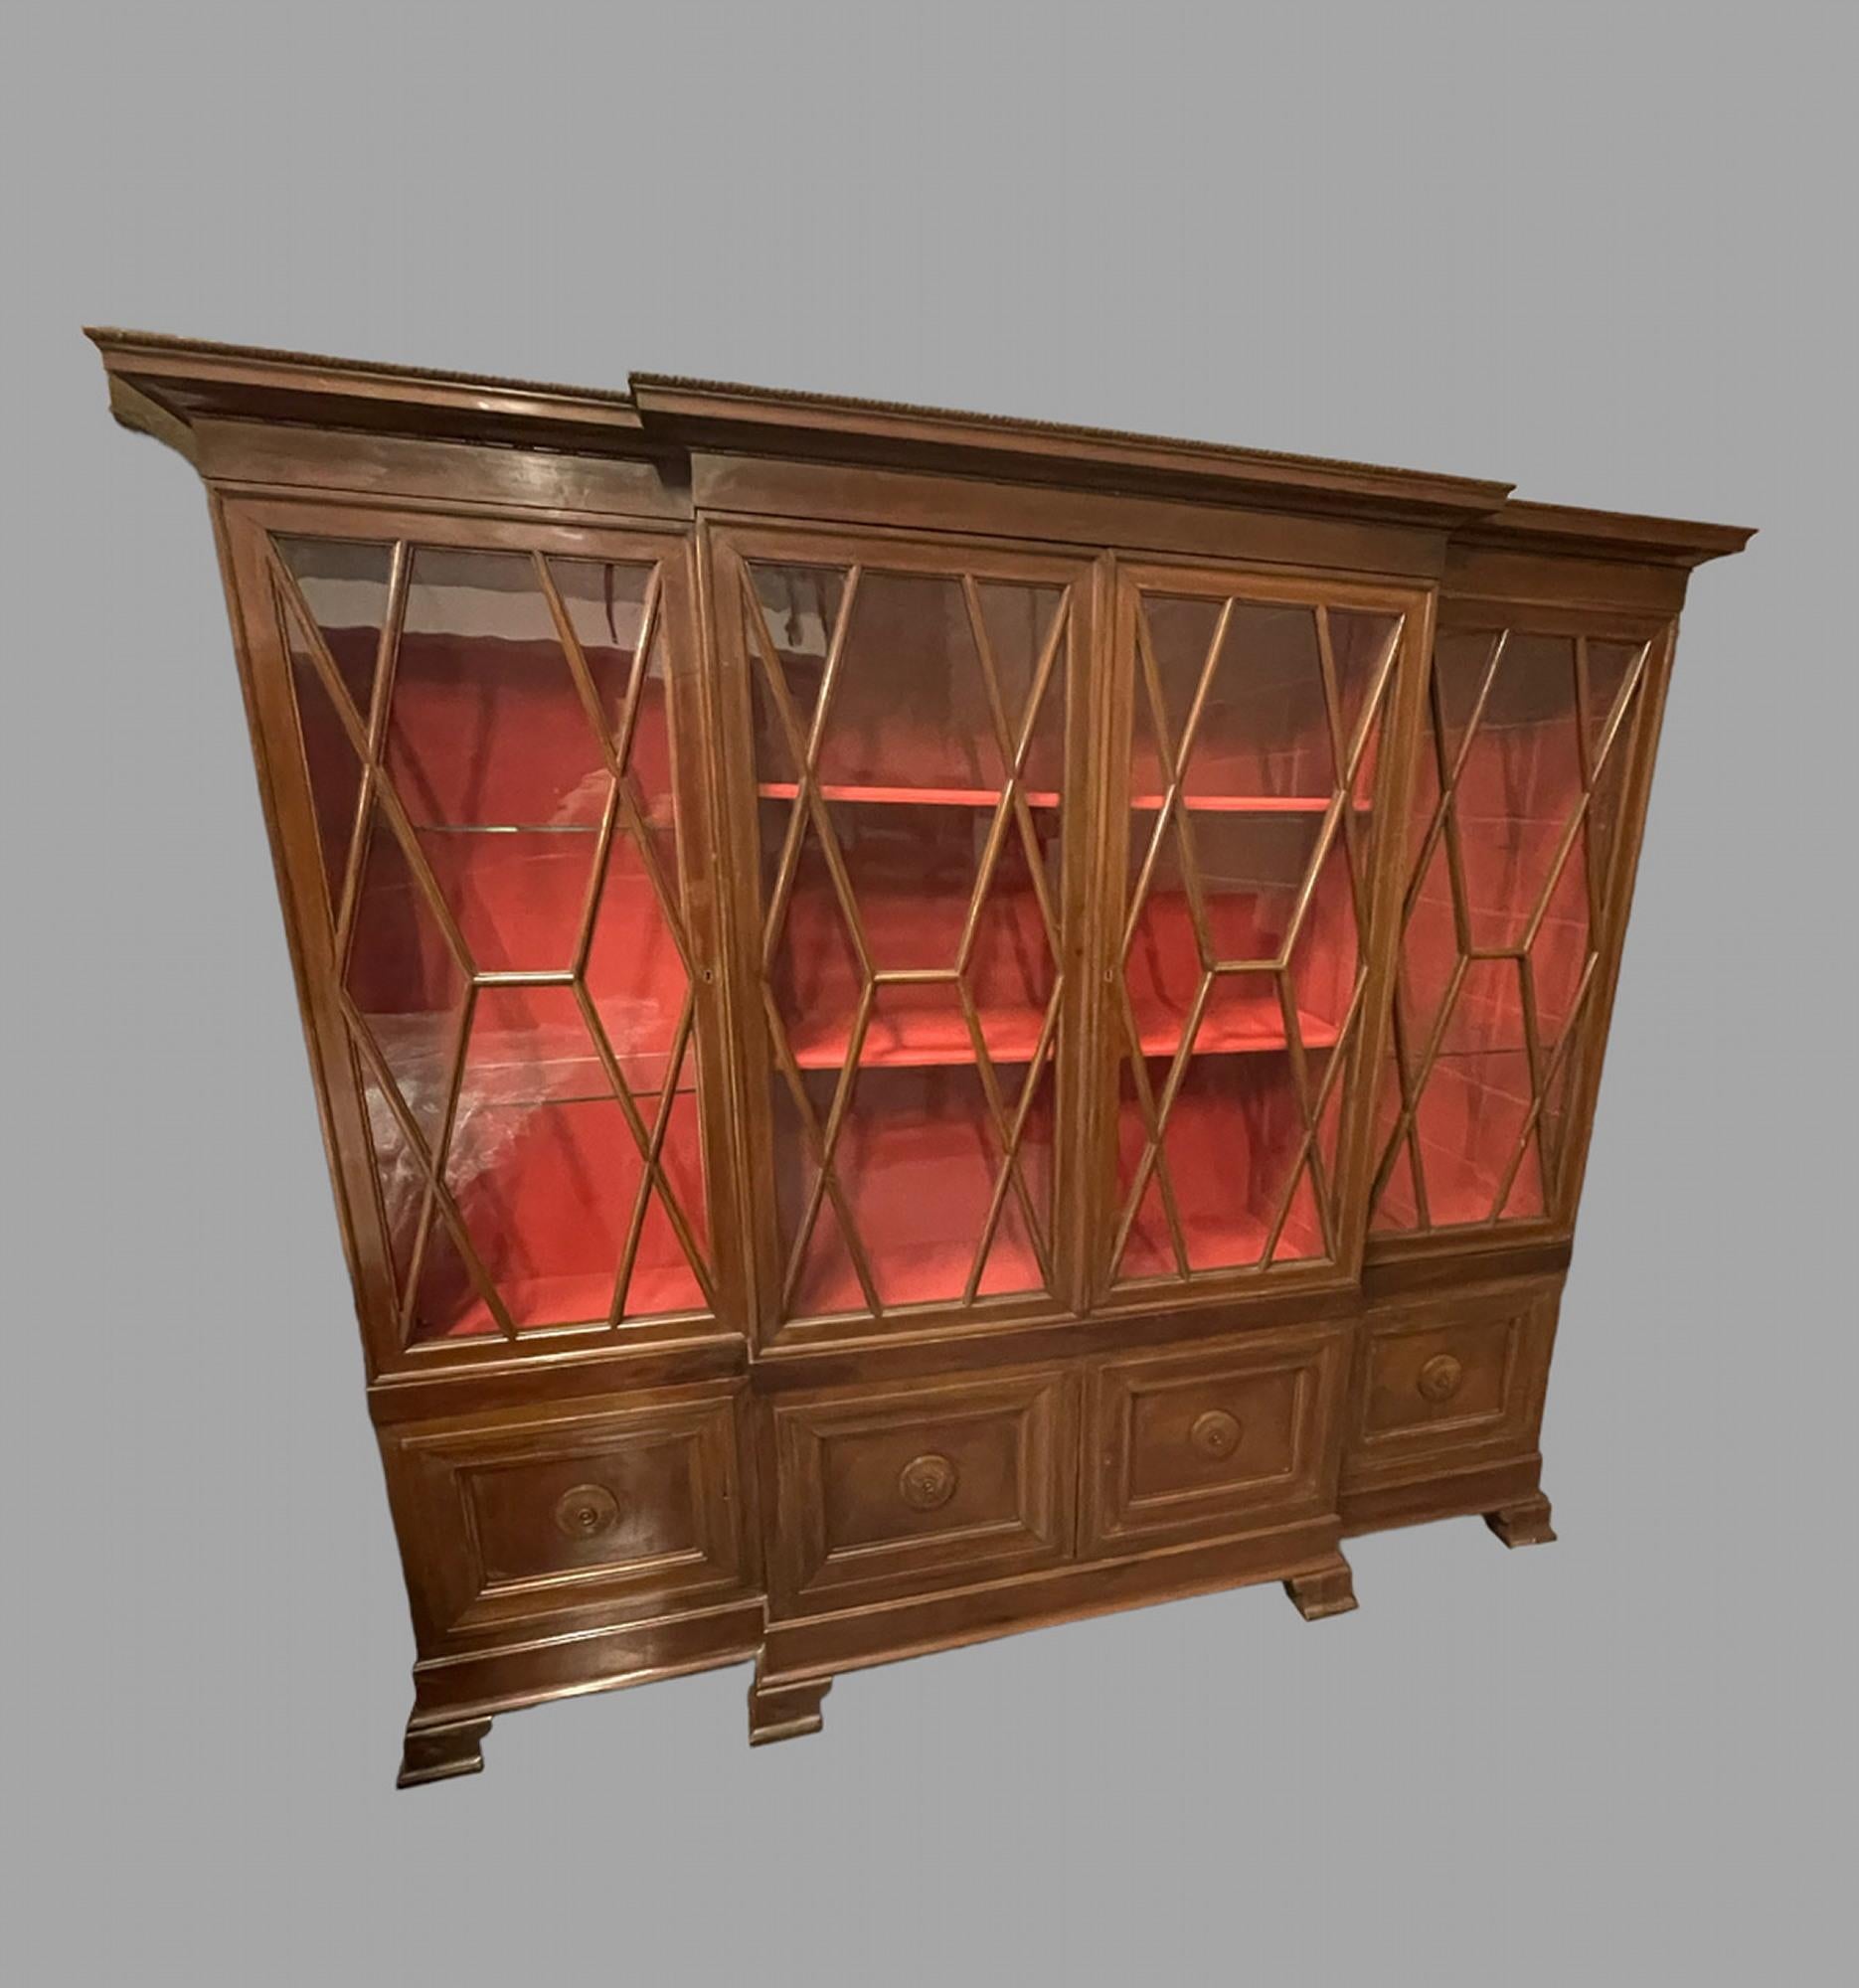 This is an attractive Italian breakfront bookcase of Italian origin and dating from the Early 20th Century, Circa 1920, this bookcase is influenced by English breakfront bookcases of the Early Nineteenth Century. The glazed doors enclose an